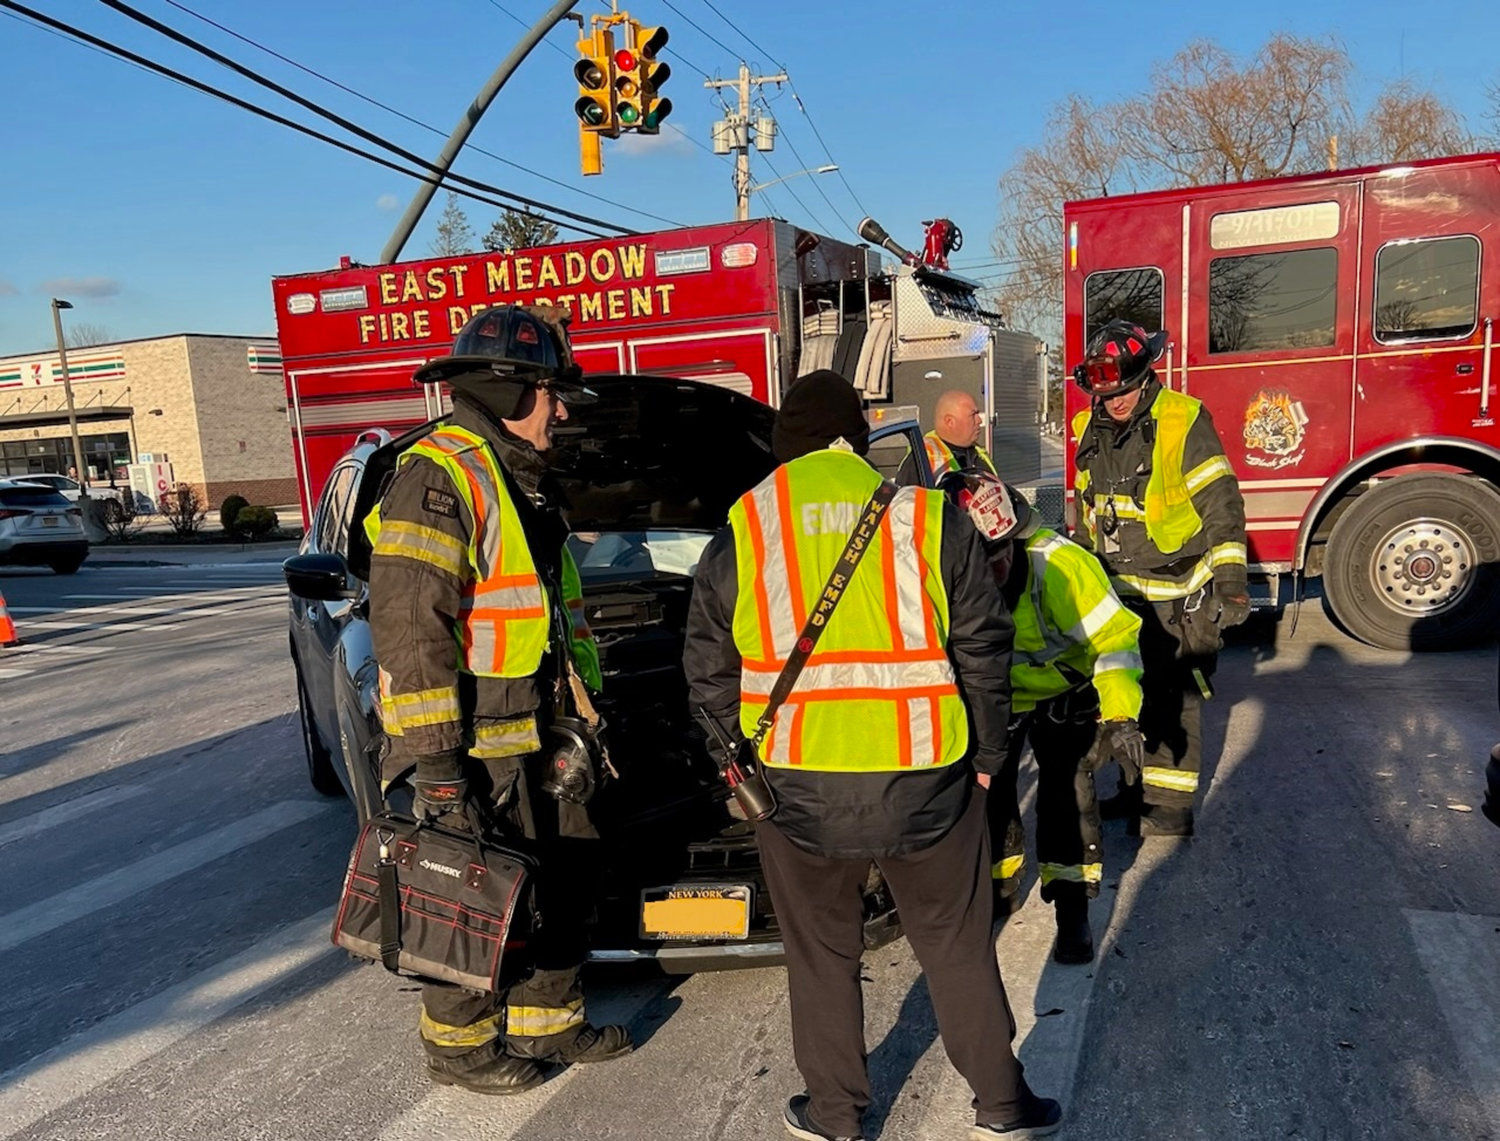 East Meadow Volunteers operated on a motor vehicle during the bitter blast of frigid temperatures during the holiday season.